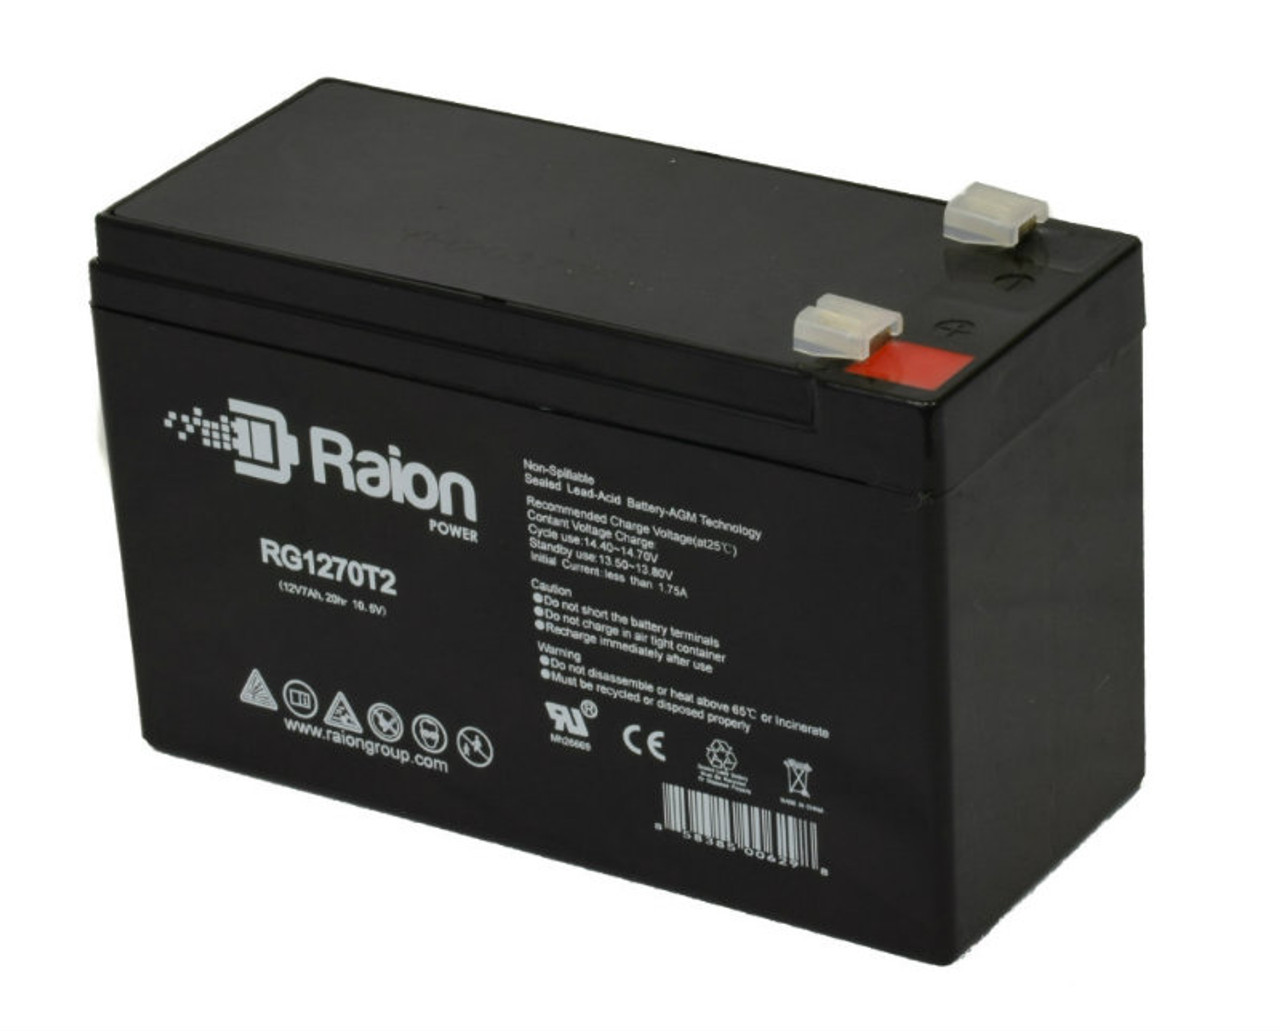 Raion Power RG1270T1 12V 7Ah Non-Spillable Replacement Battery for Long Way LW-6FM7.6